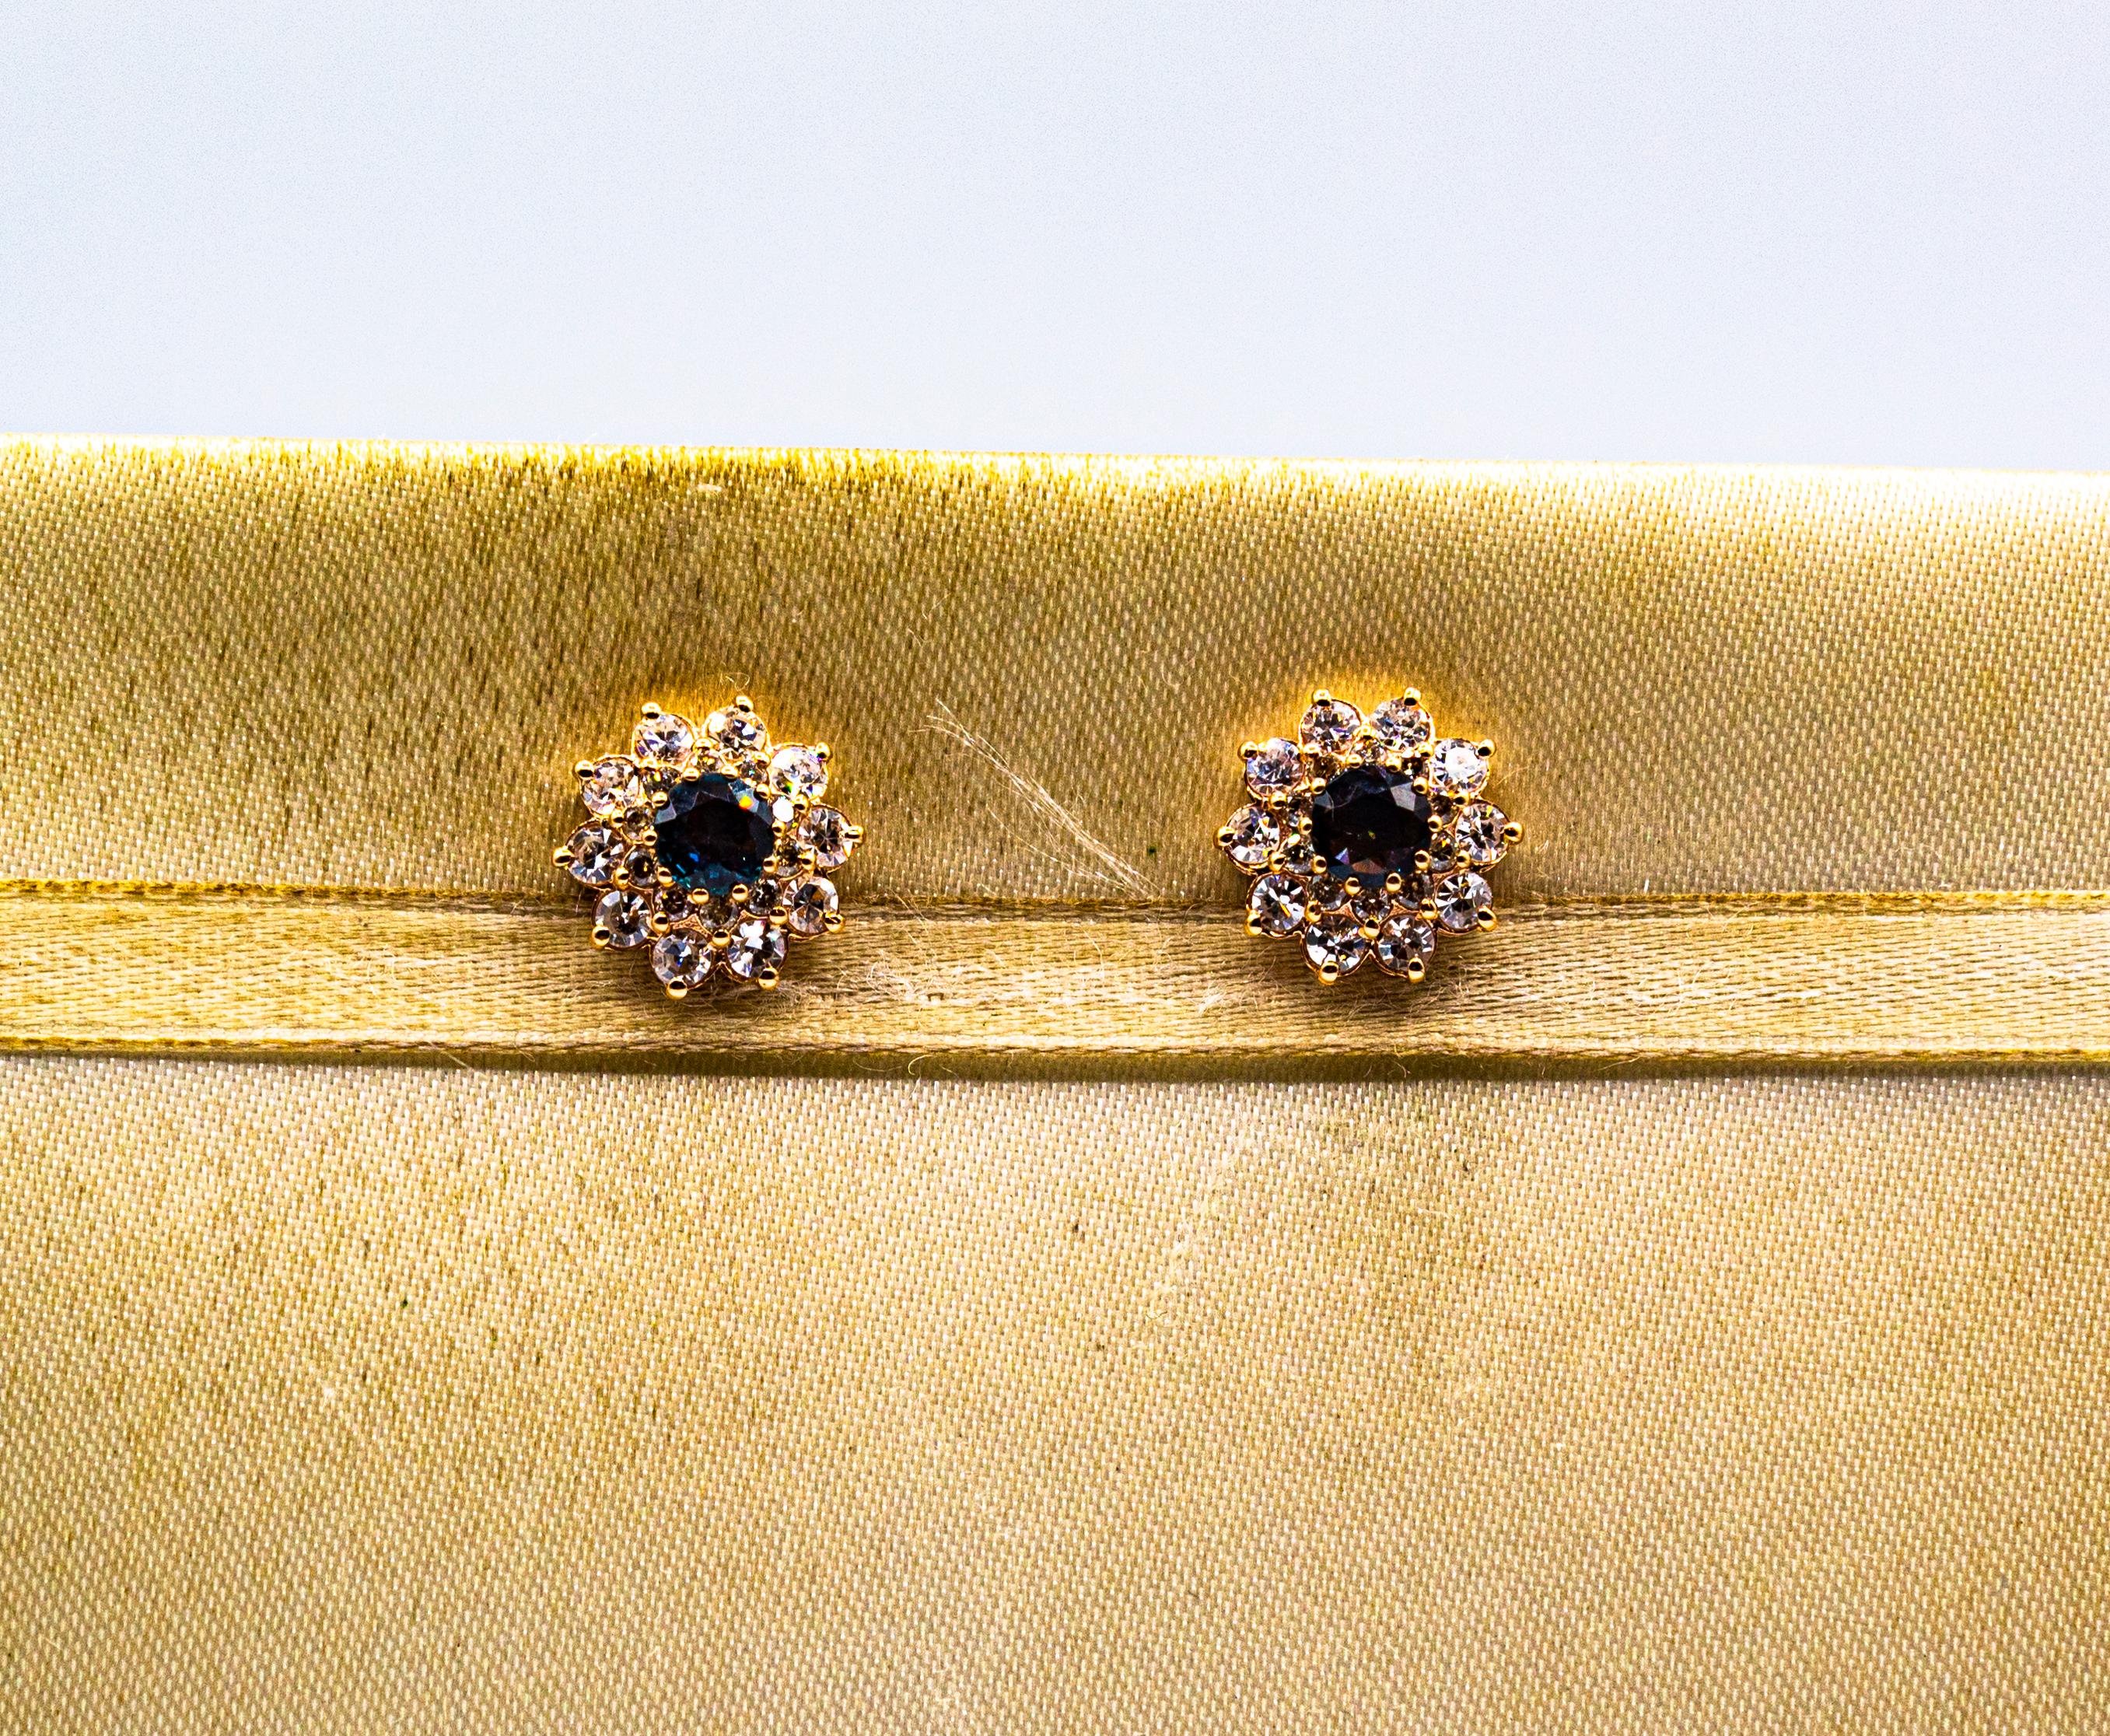 These Earrings are made of 14K Yellow Gold.
These Earrings have two 0.52 Carats Blue Sapphires (1.04 Carats in total).
These Earrings have 1.20 Carats of White Brilliant Cut Diamonds.

These Earrings are available also with central Rubies, Emeralds